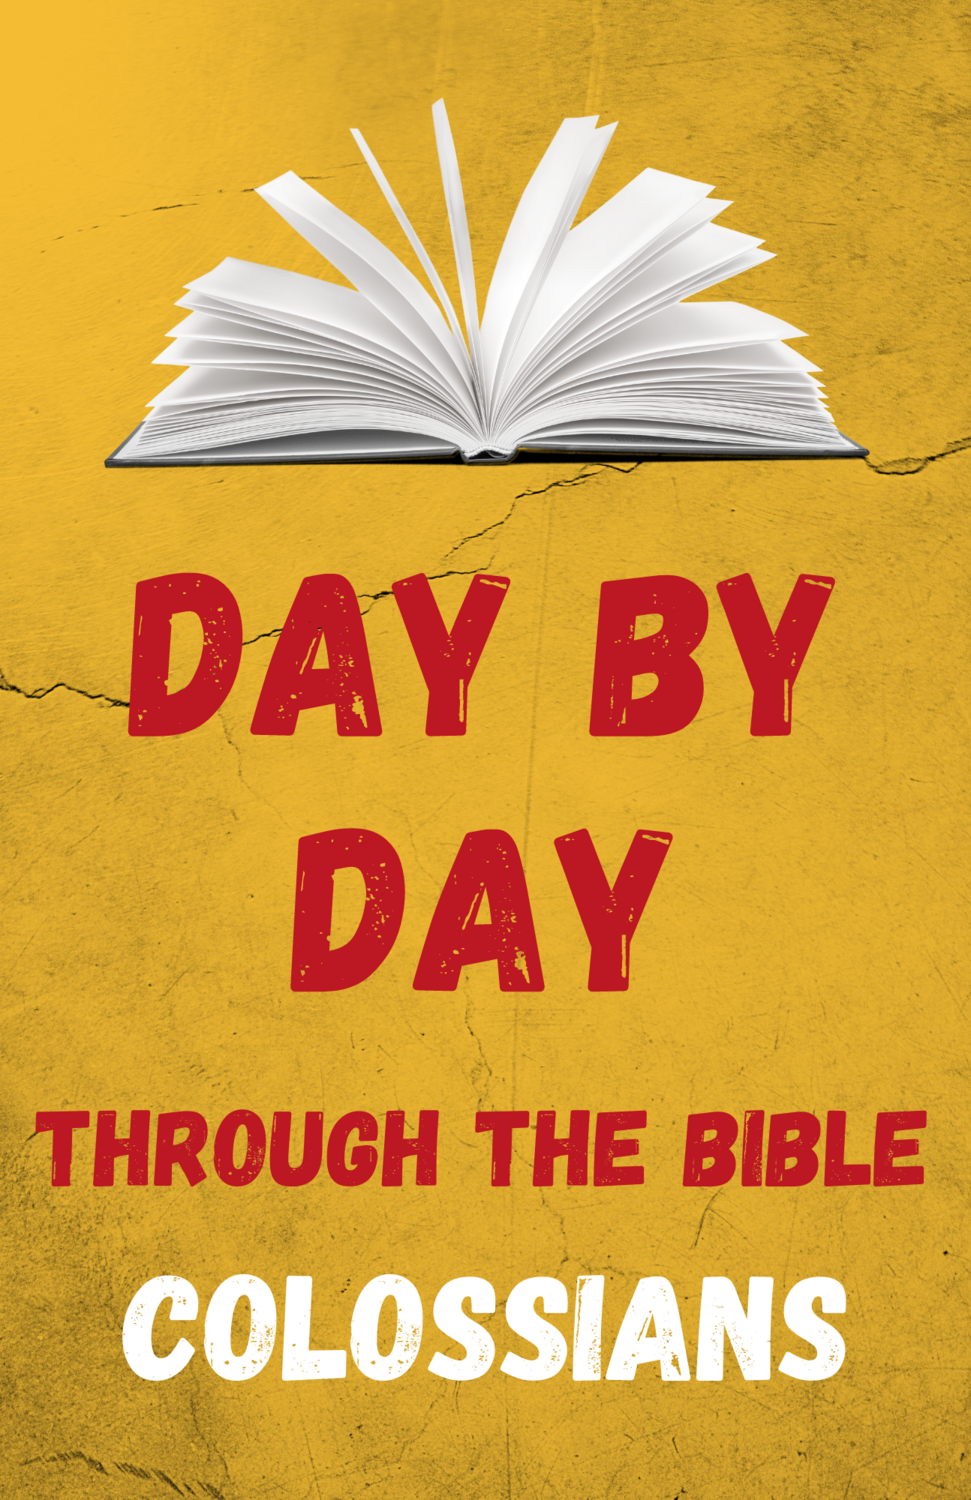 Day by Day Through the Bible: Four Days in Colossians - Digital Download